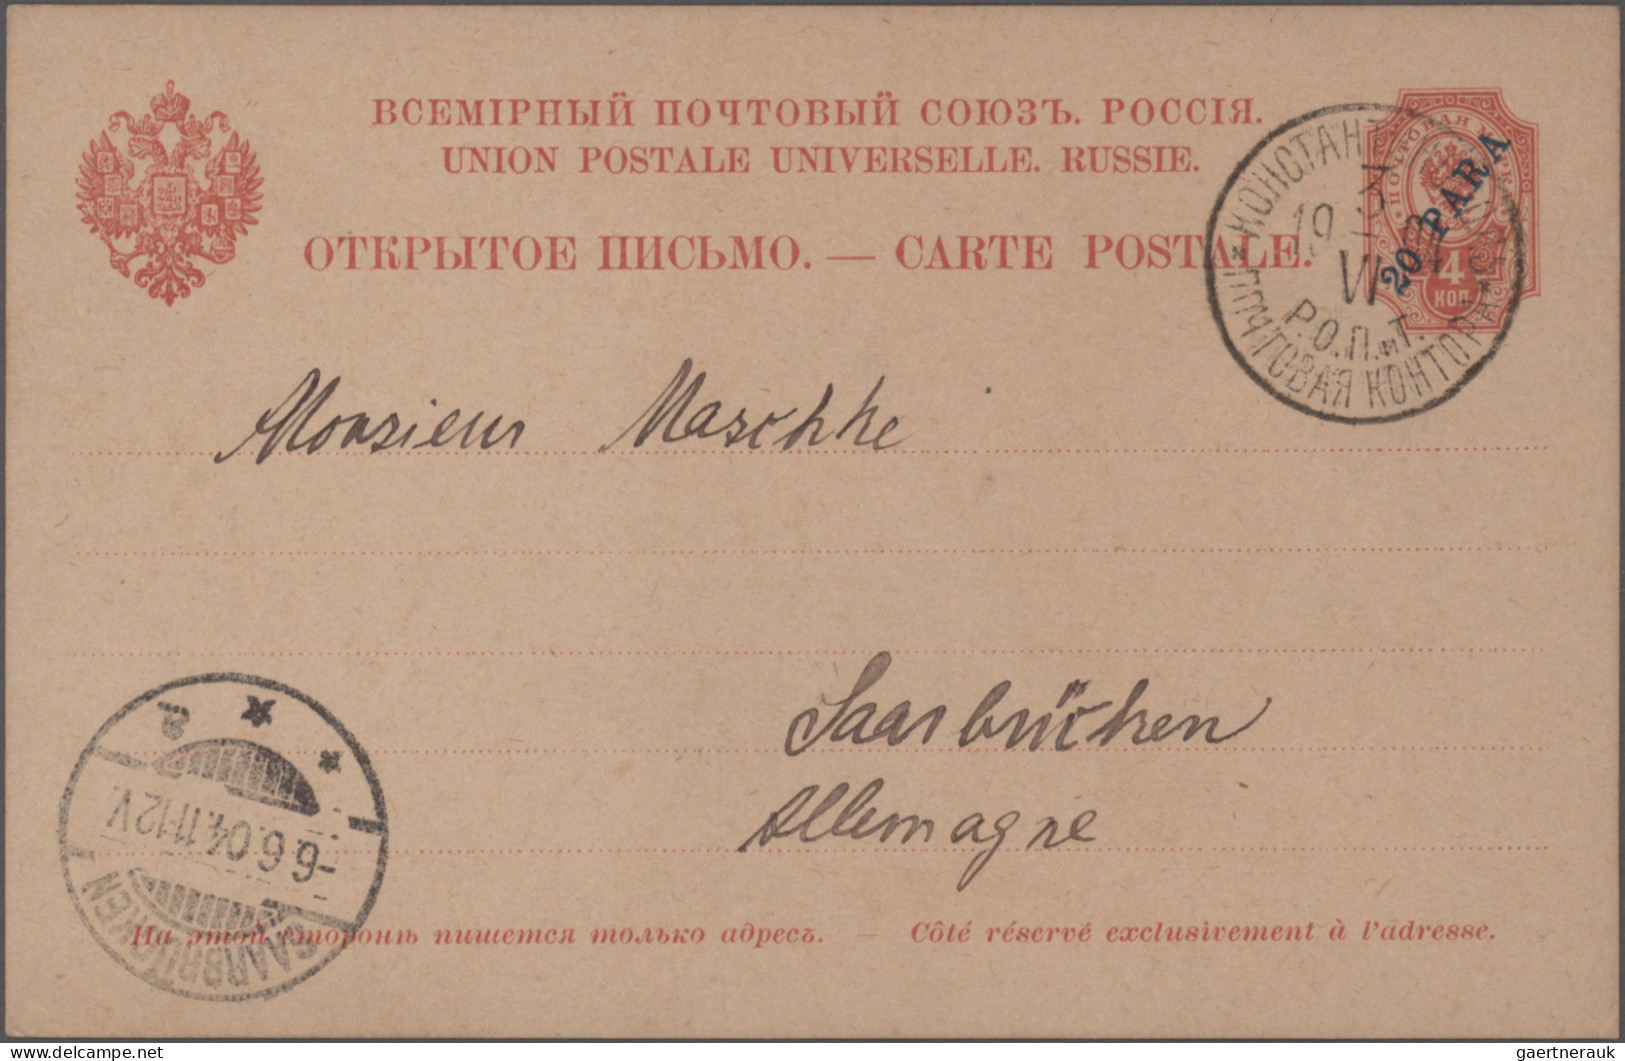 Russia - Postal Stationary: 1848-1920 Collection of more than 130 postal station